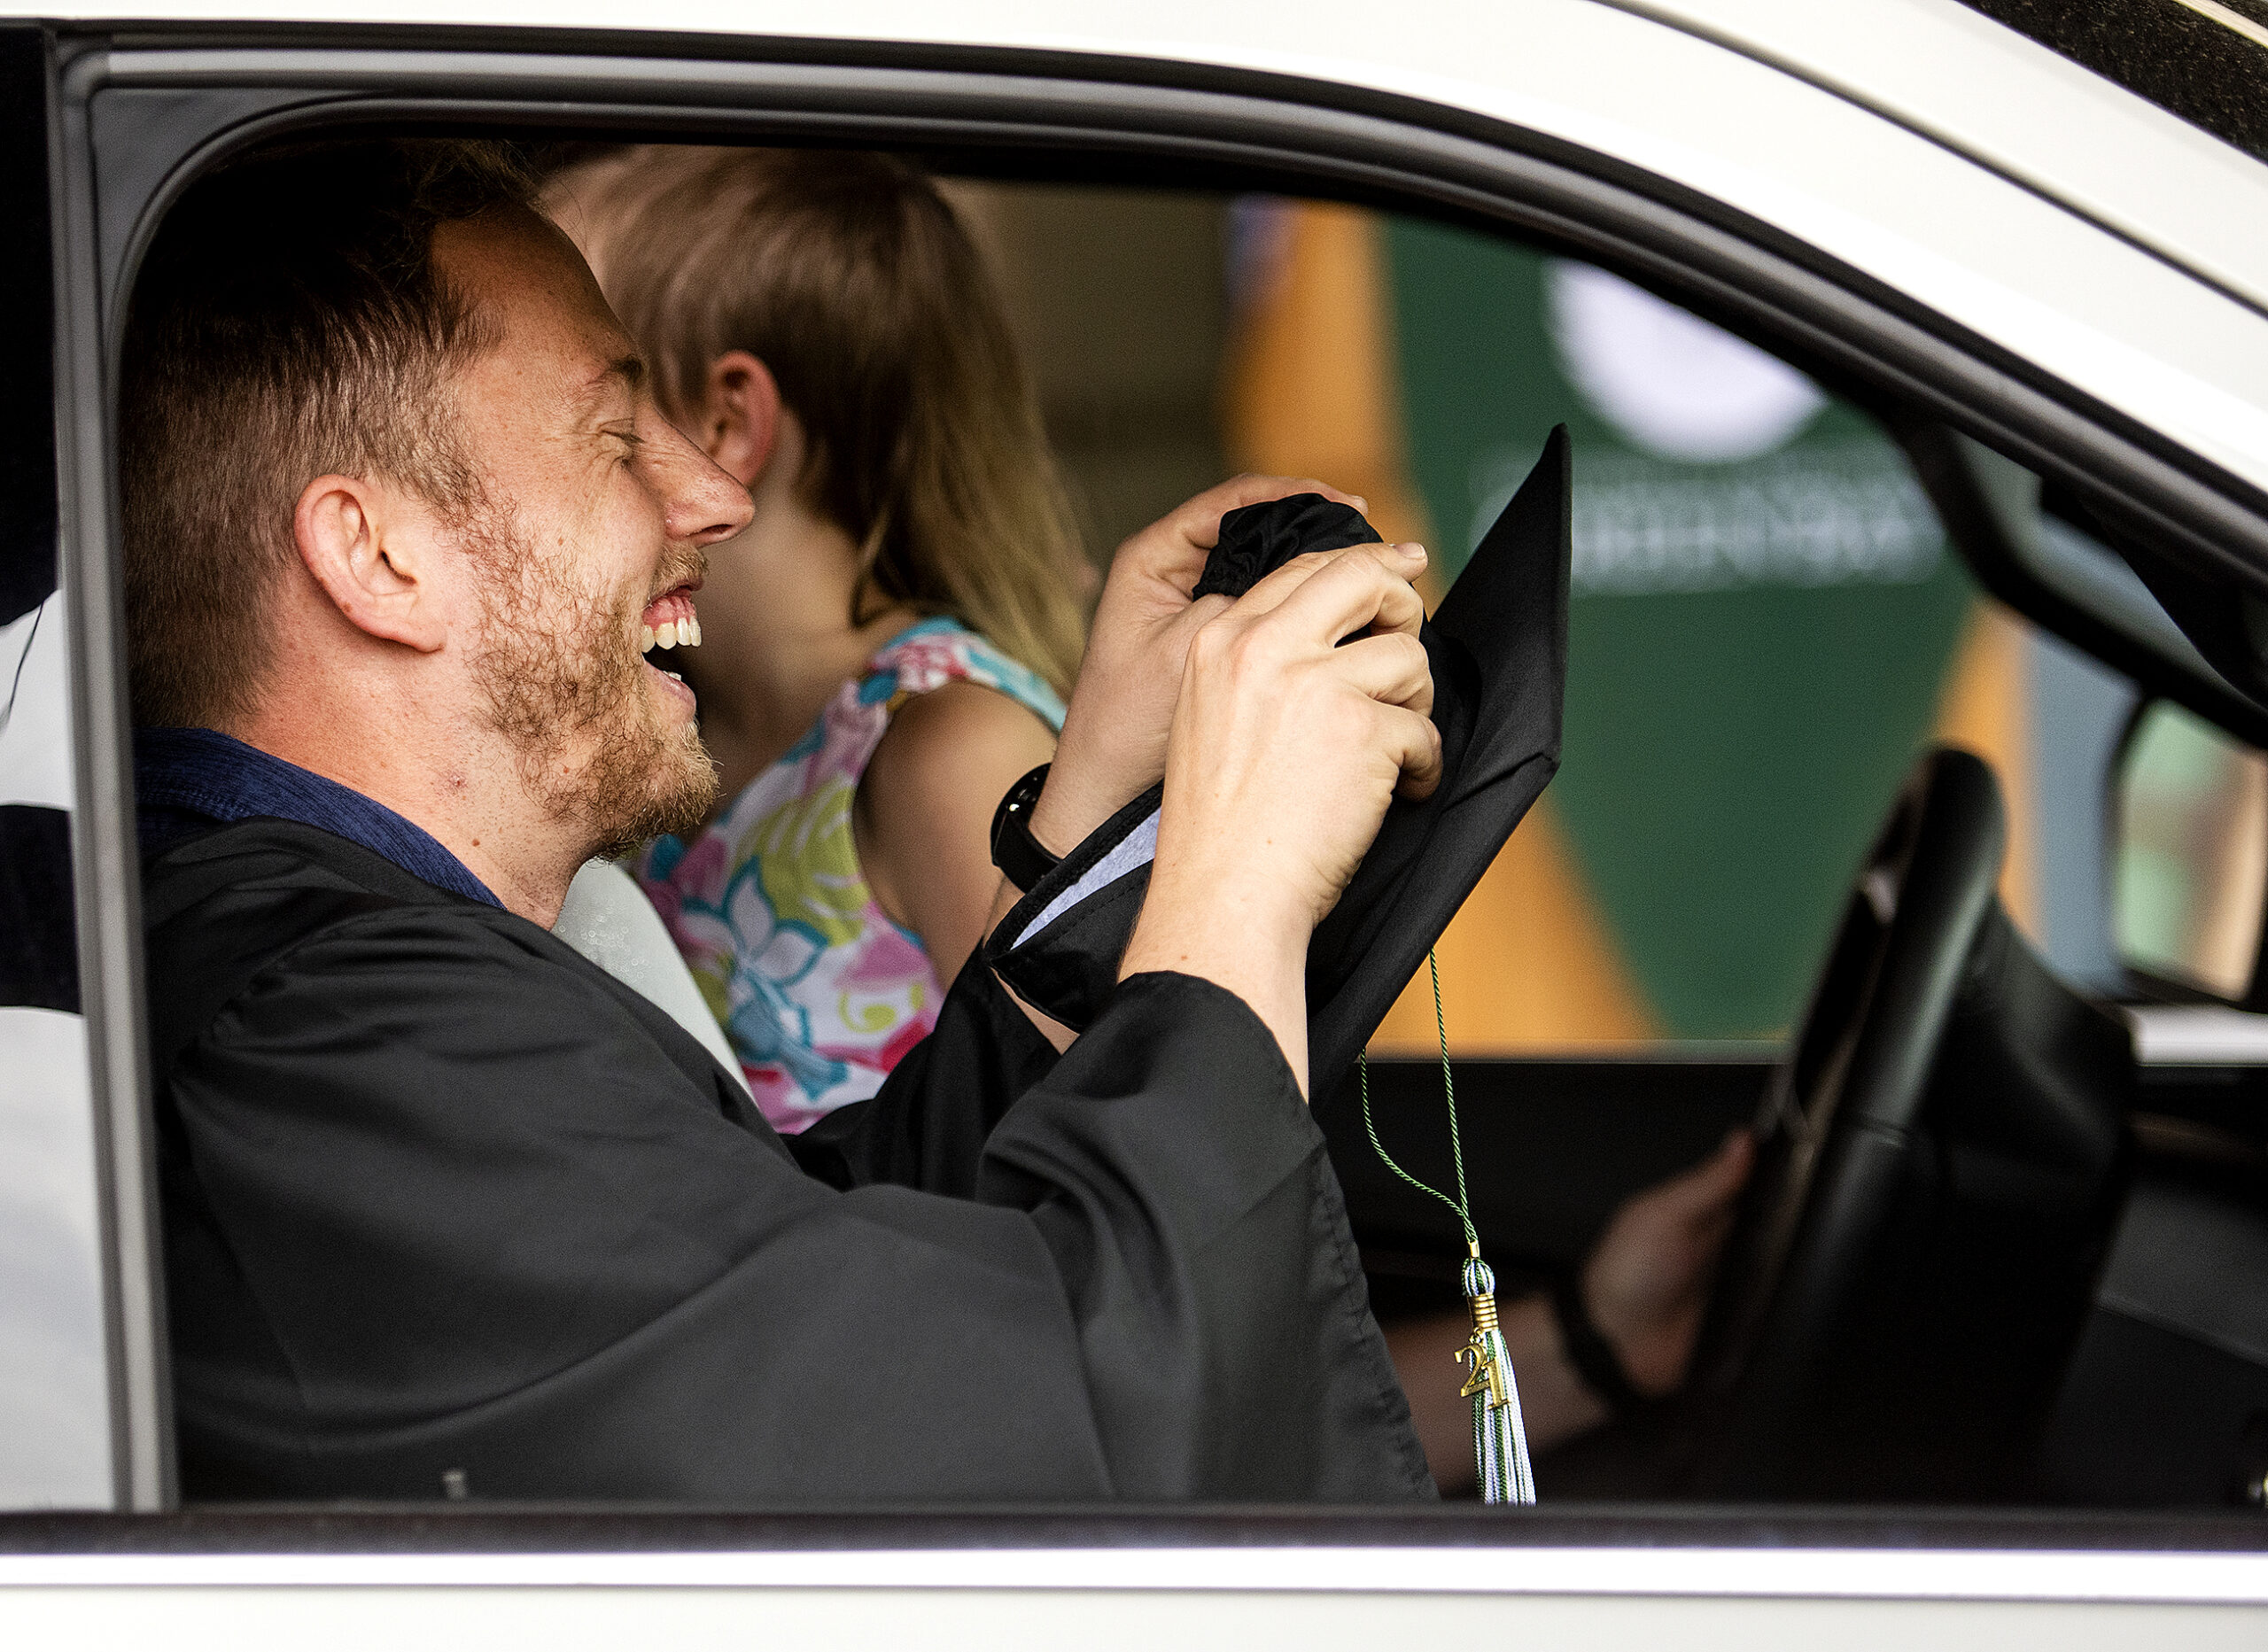 A graduate leans his head back and smiles while sitting in the passenger seat of a vehicle.